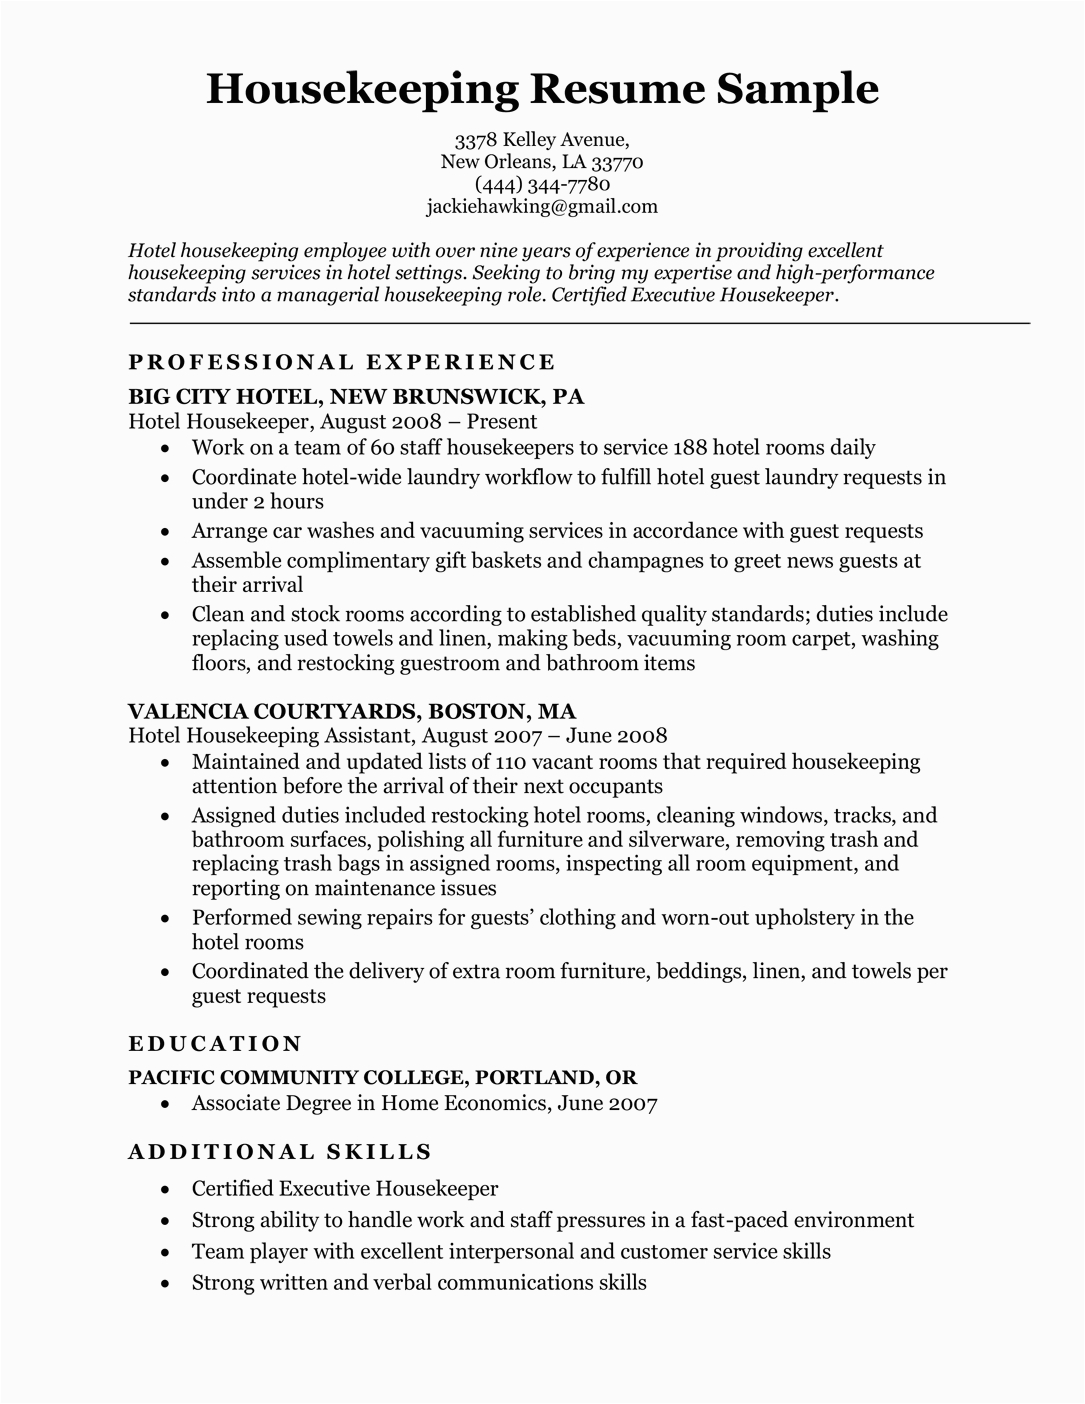 Sample Resume for Housekeeping with No Experience Housekeeping Resume Sample